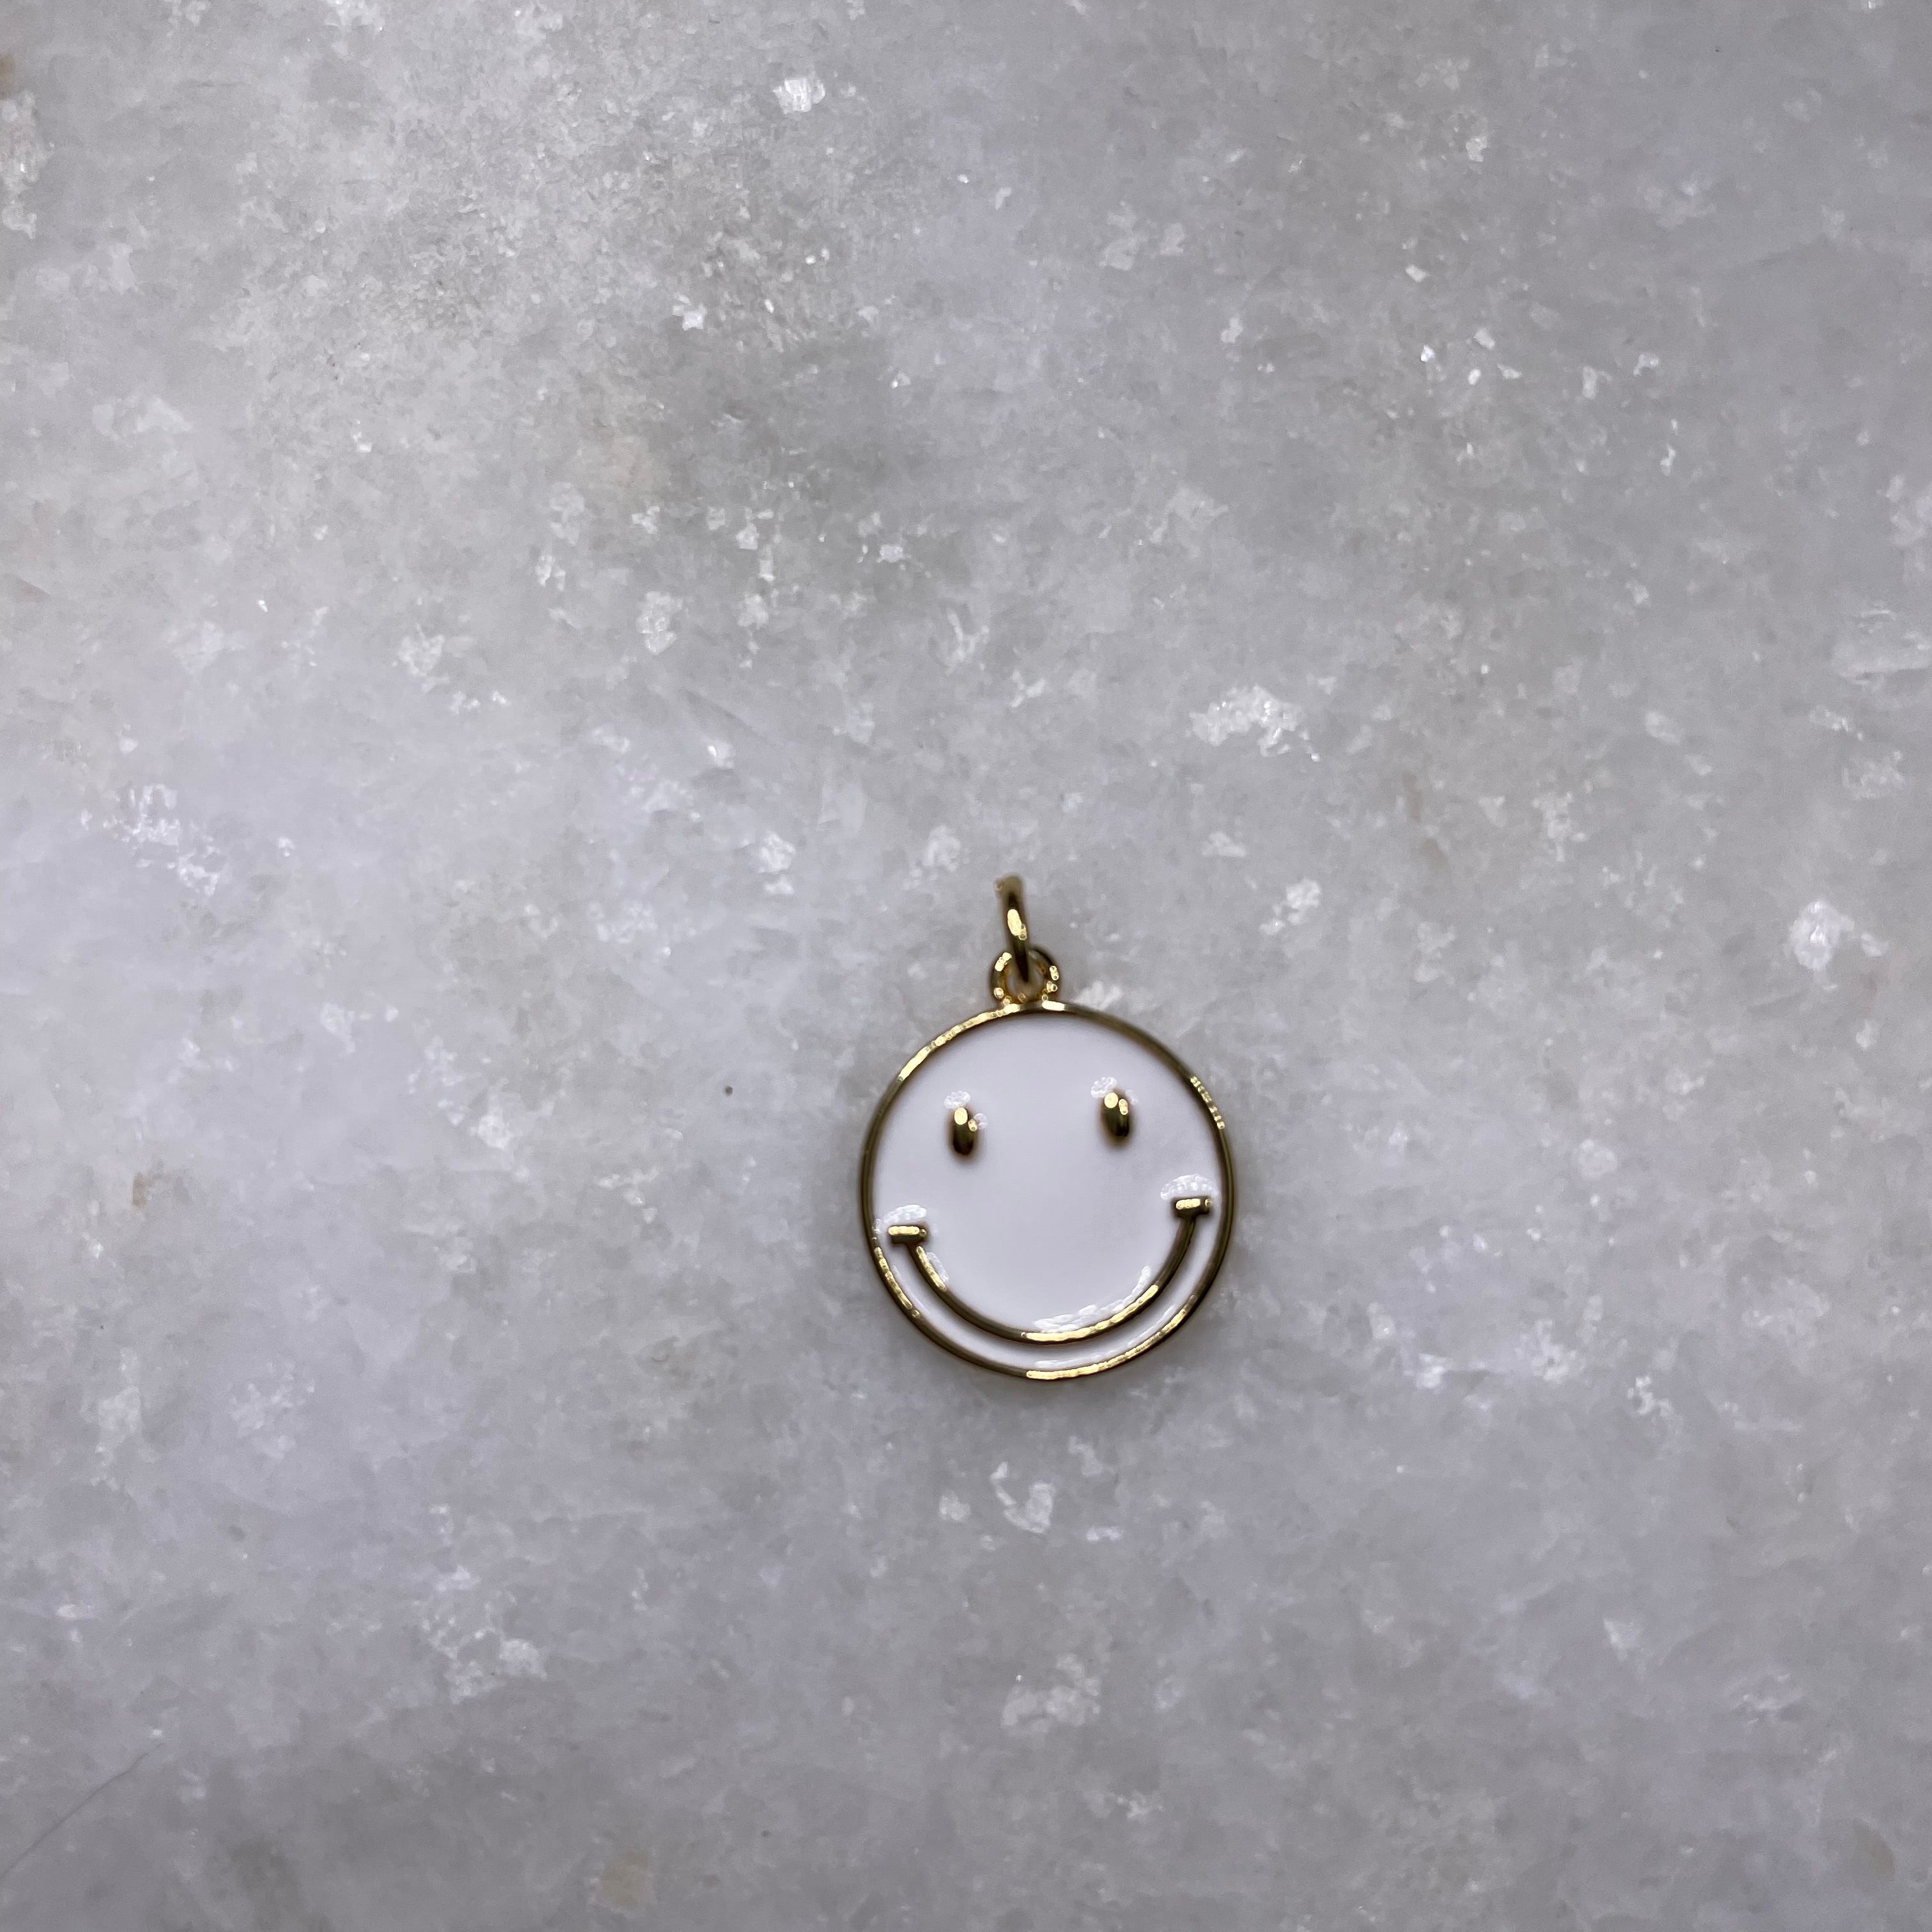 Enamel Smiley Charms-Assorted.